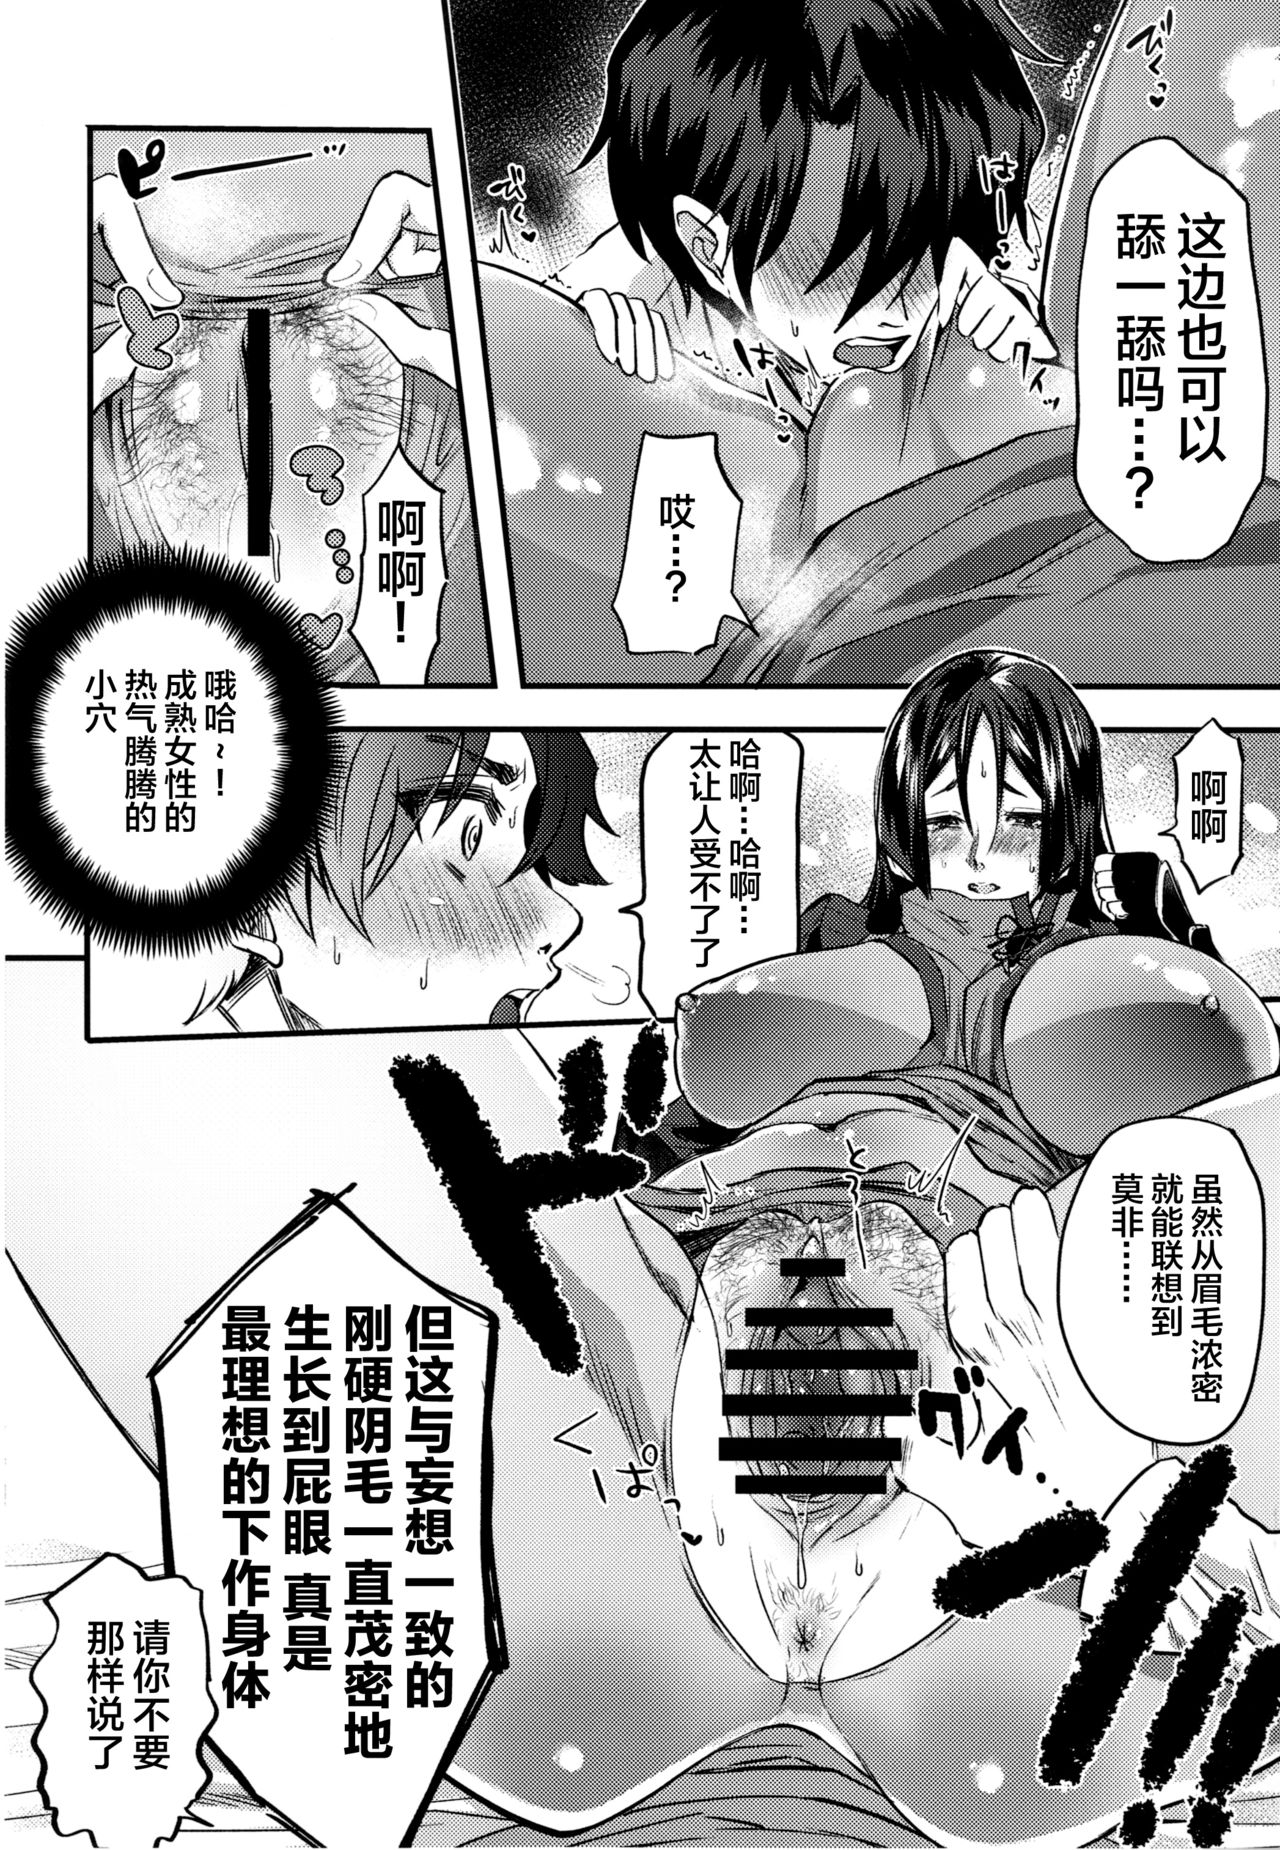 [Chimple Hotters (Chimple Hotter)] +SAPPORT no Raikou Mama to NTR Ecchi (Fate/Grand Order) [Chinese] [黎欧x新桥月白日语社] [Digital] page 10 full